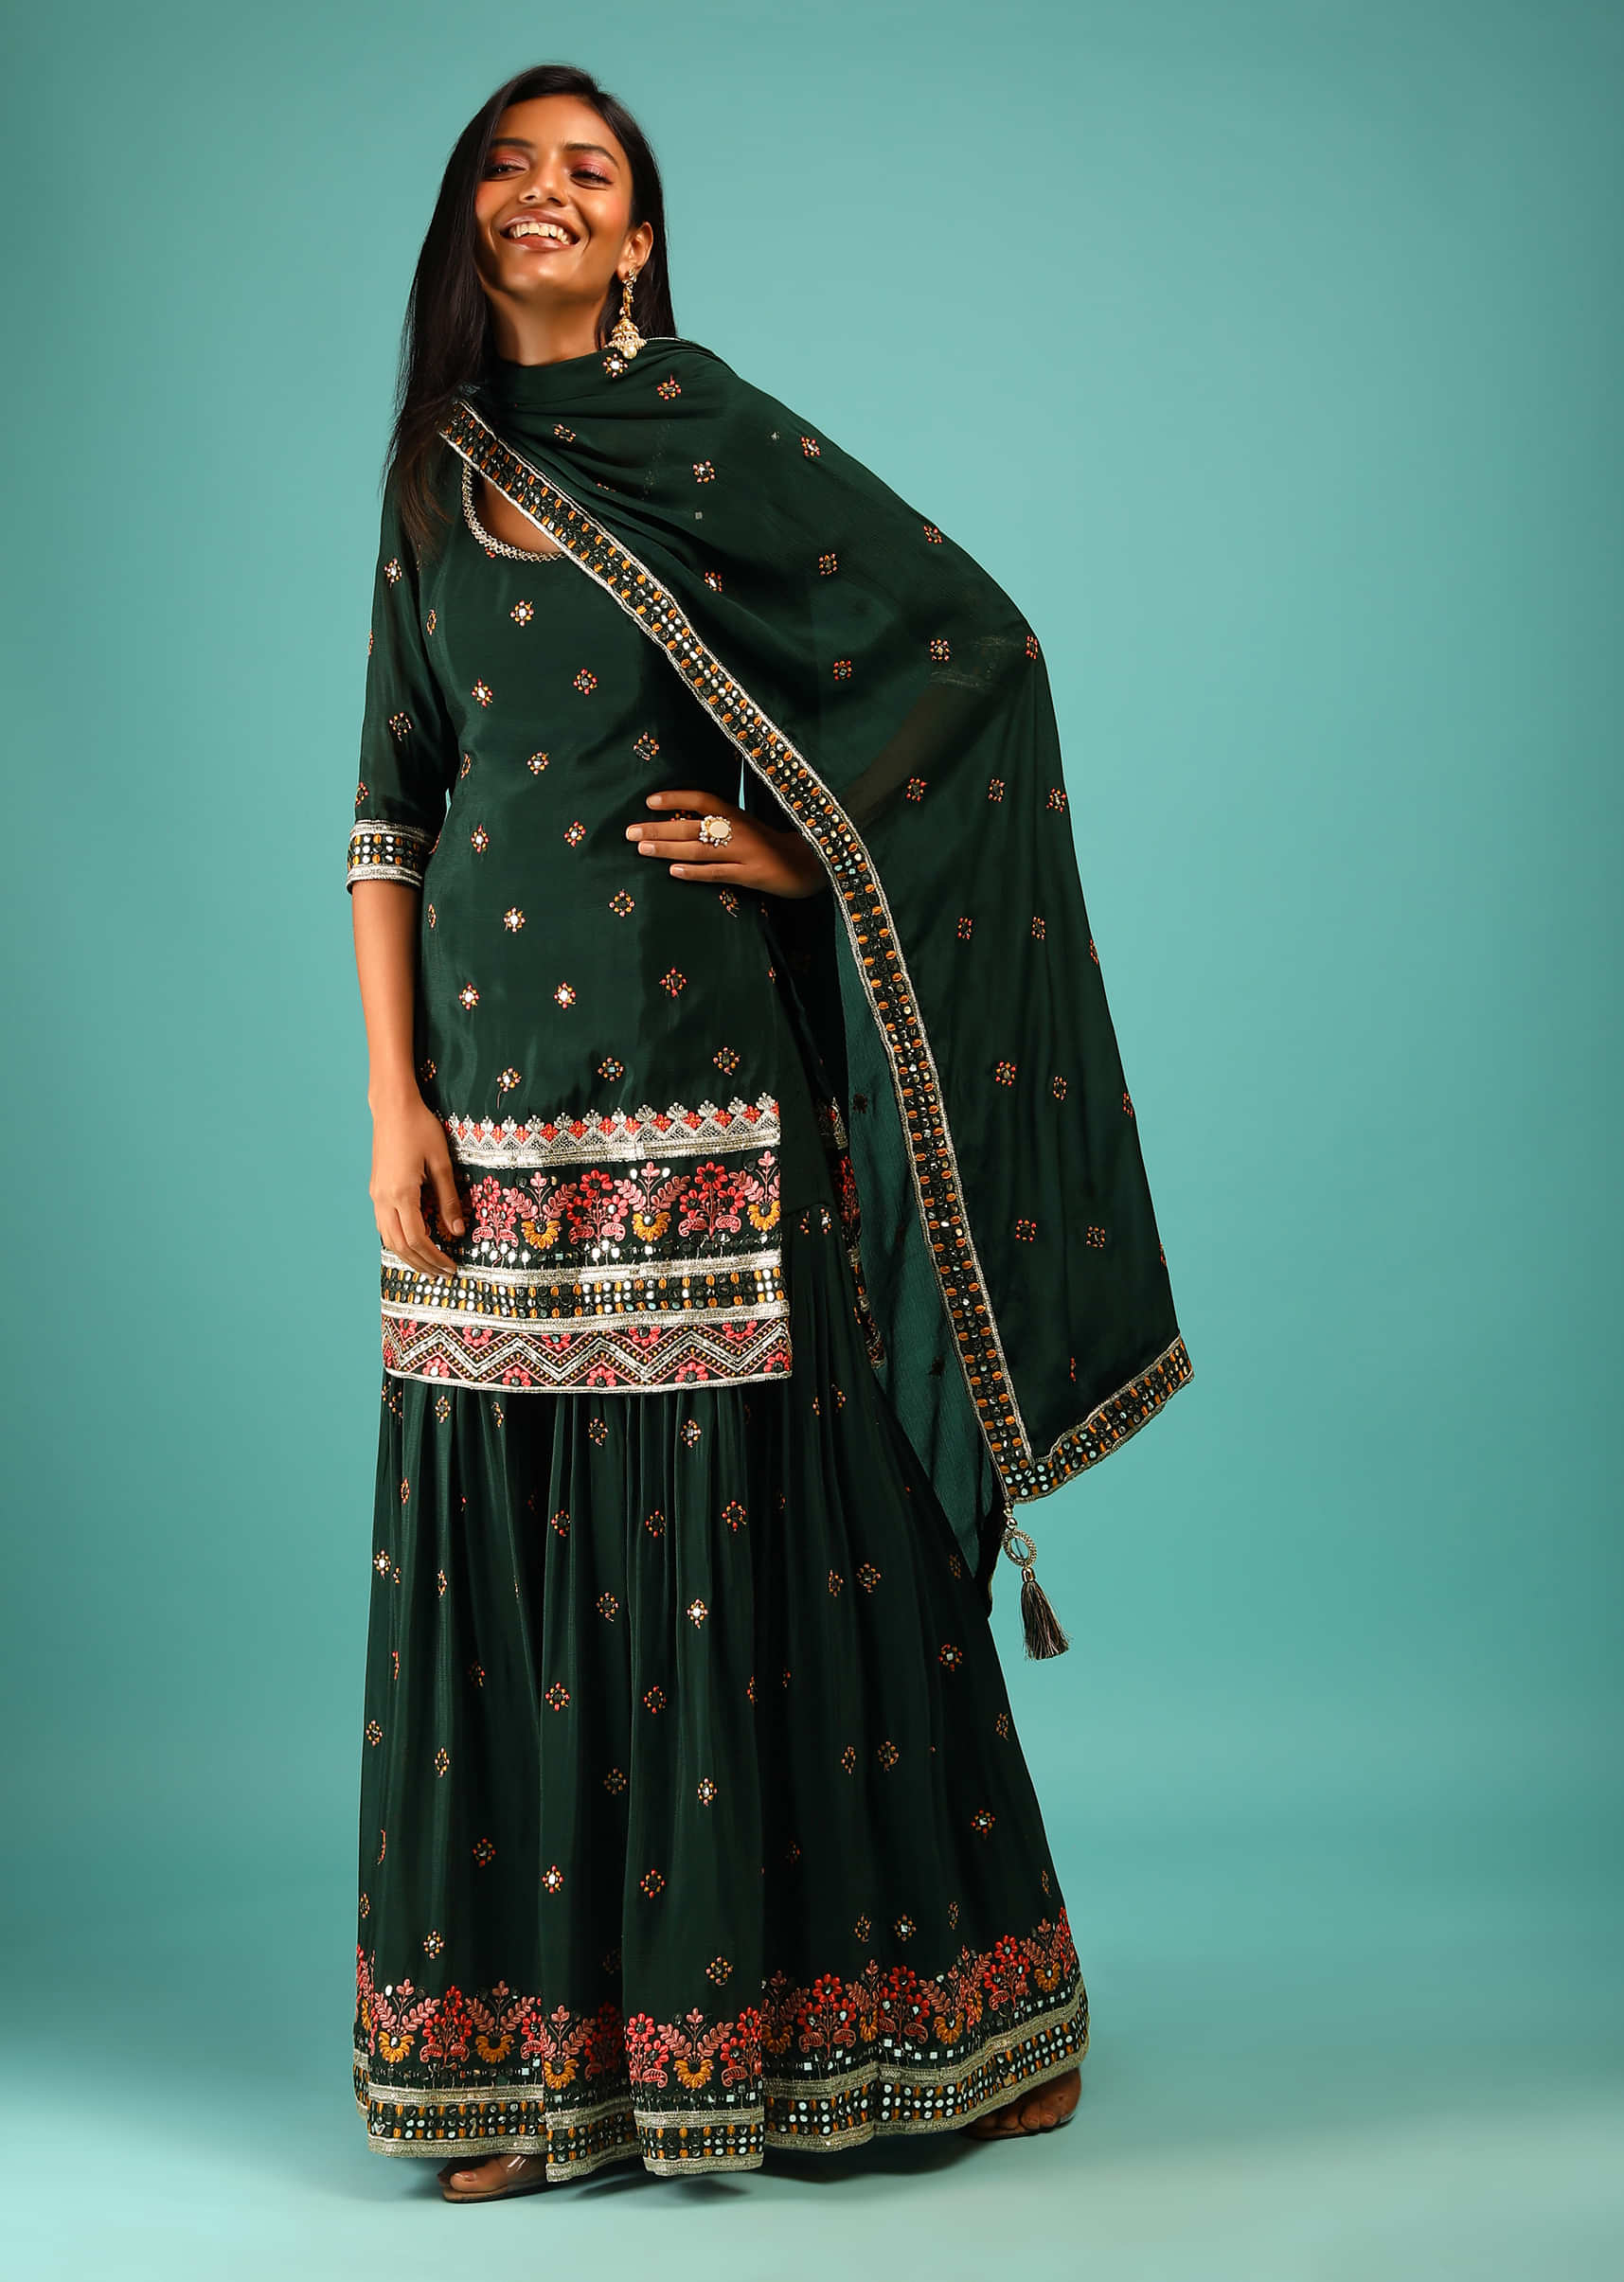 Pine Green Sharara Suit With Three Quarter Sleeves And Multi Colored Resham And Abla Embroidery